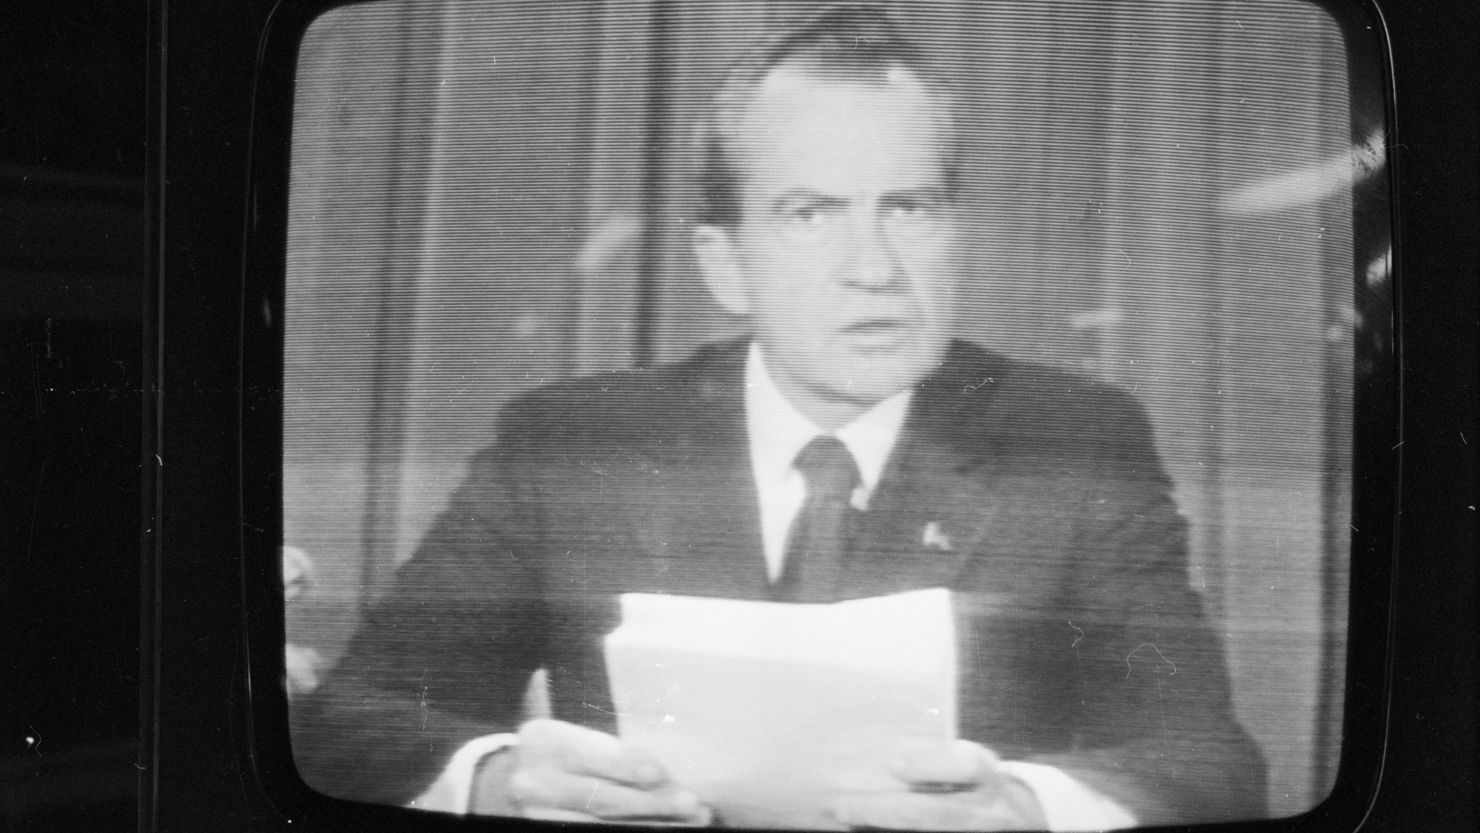 President Richard Nixon announces his resignation in 1974, following the Watergate scandal.